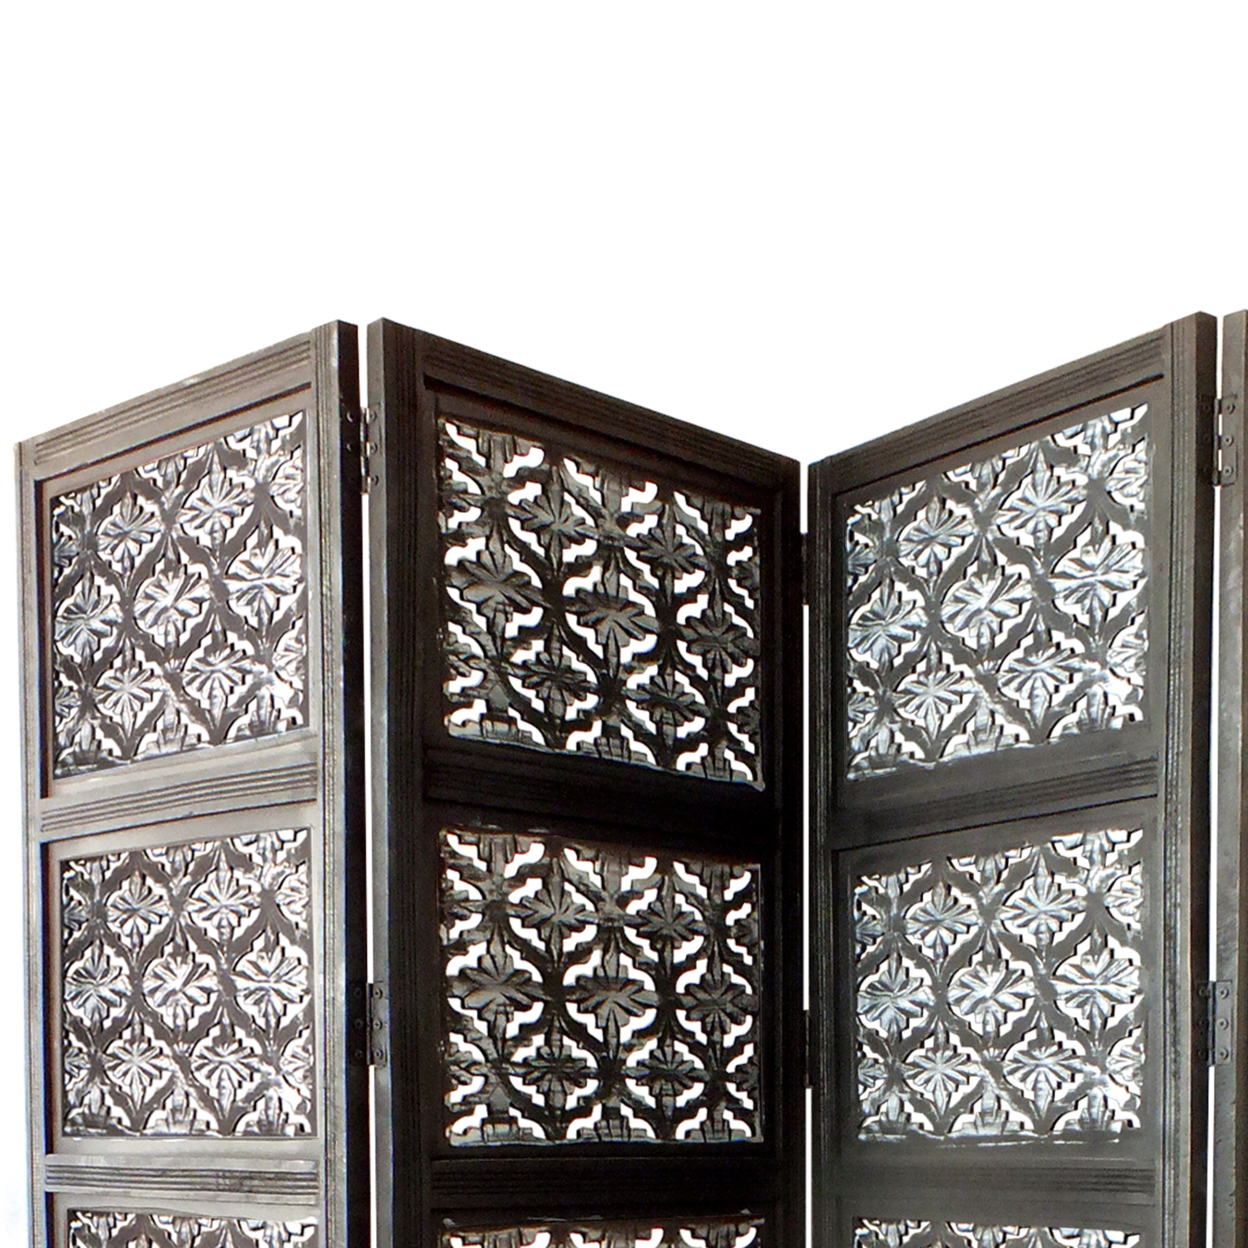 Four Panel Mango Wood Room Divider With Traditional Carvings, Black And White- Saltoro Sherpi